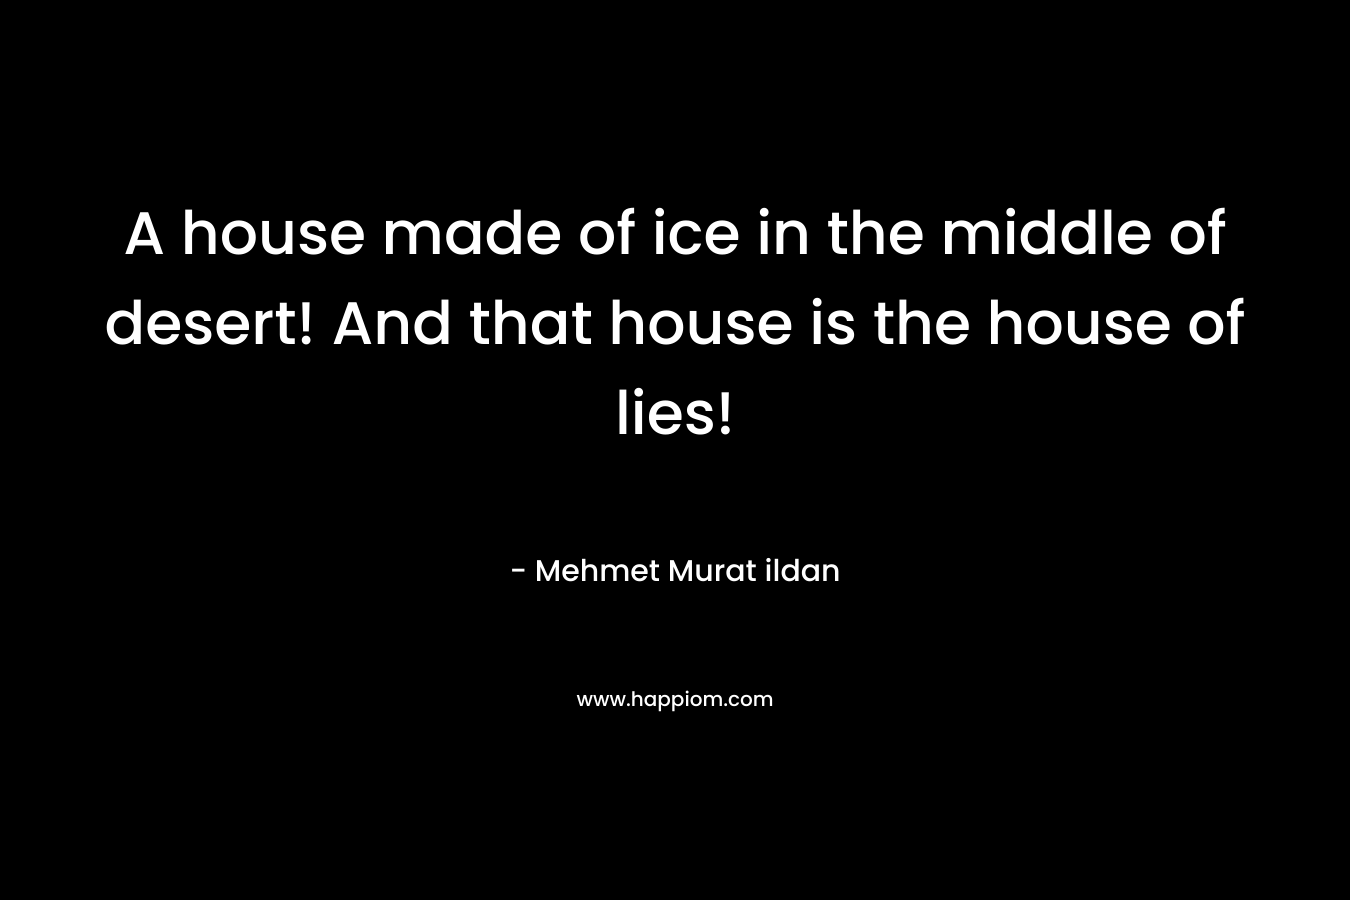 A house made of ice in the middle of desert! And that house is the house of lies!